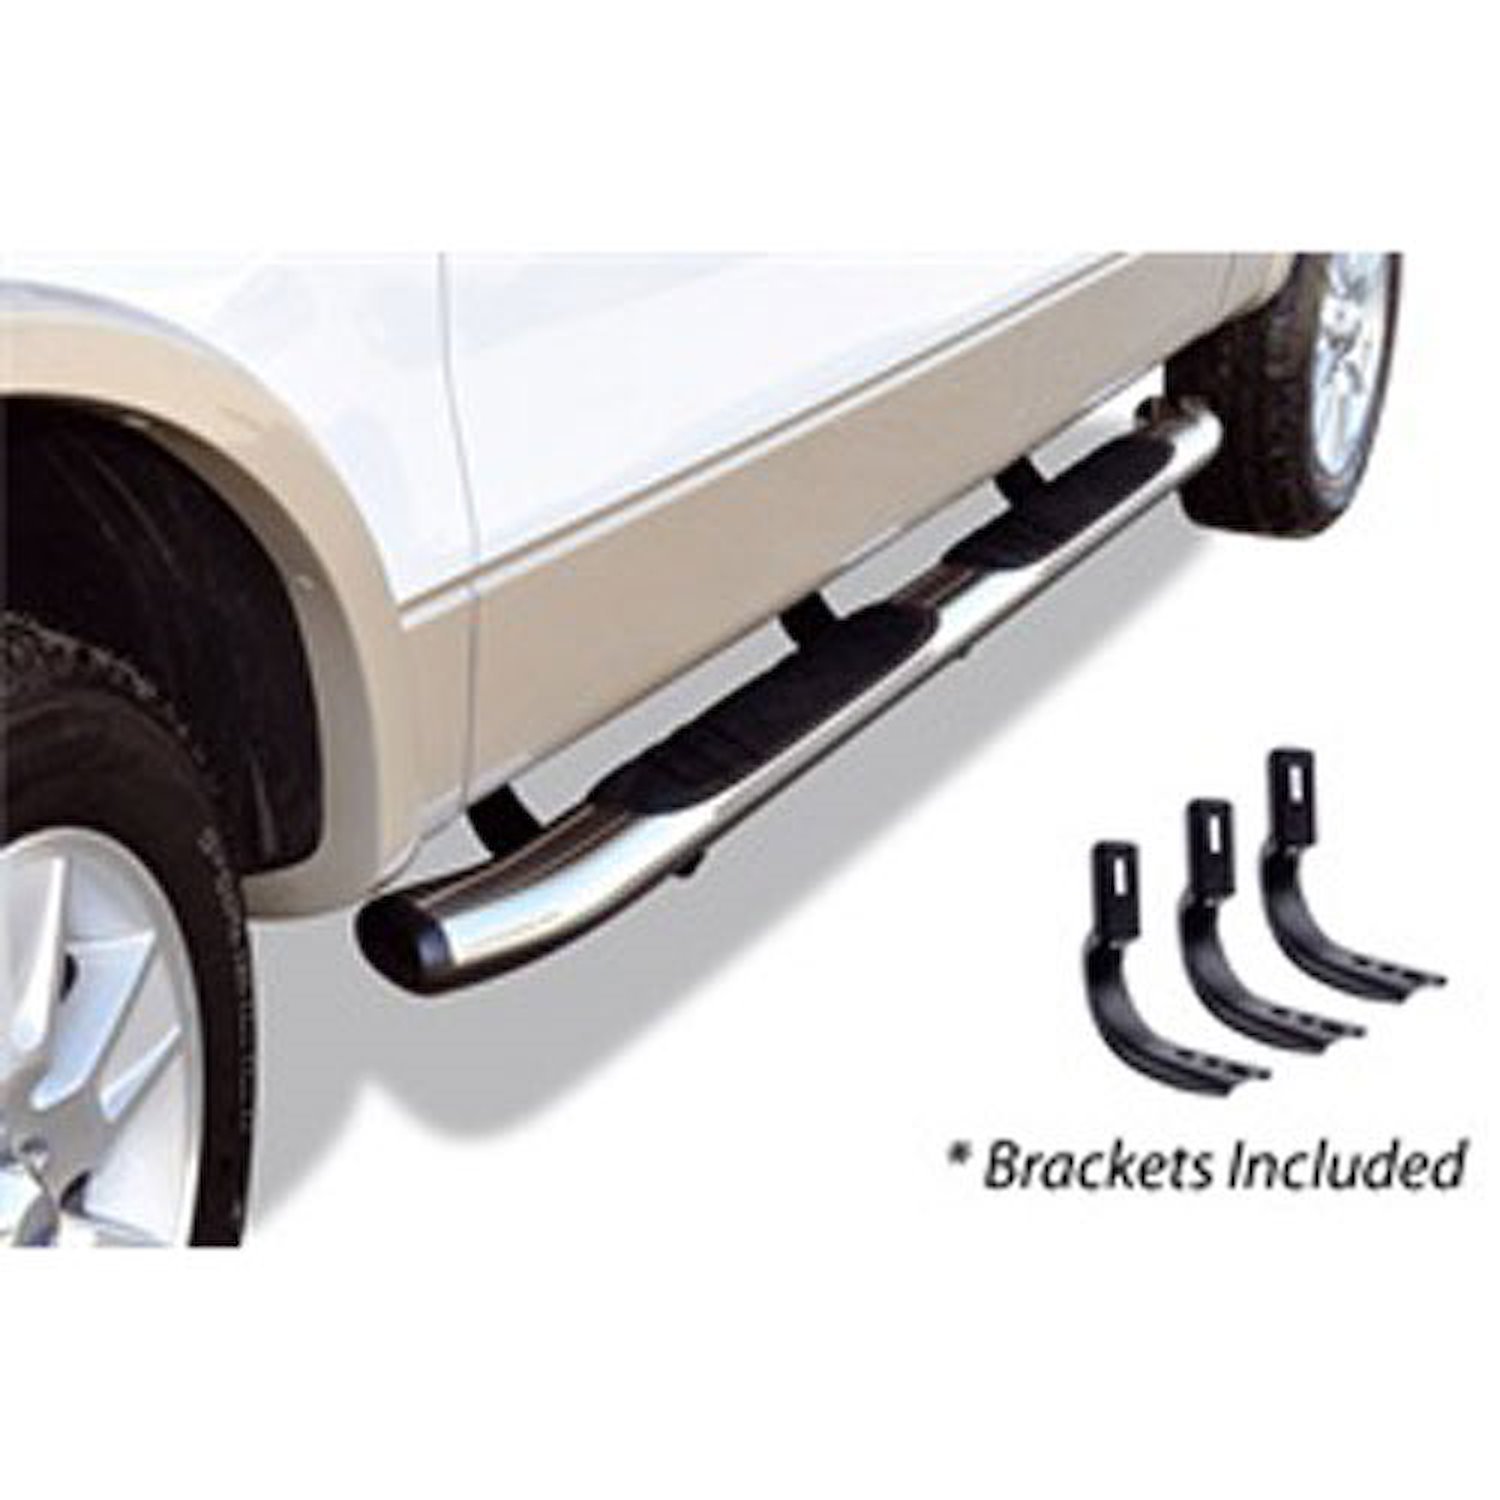 5 in. OE Xtreme Composite SideSteps Kit 2015-16